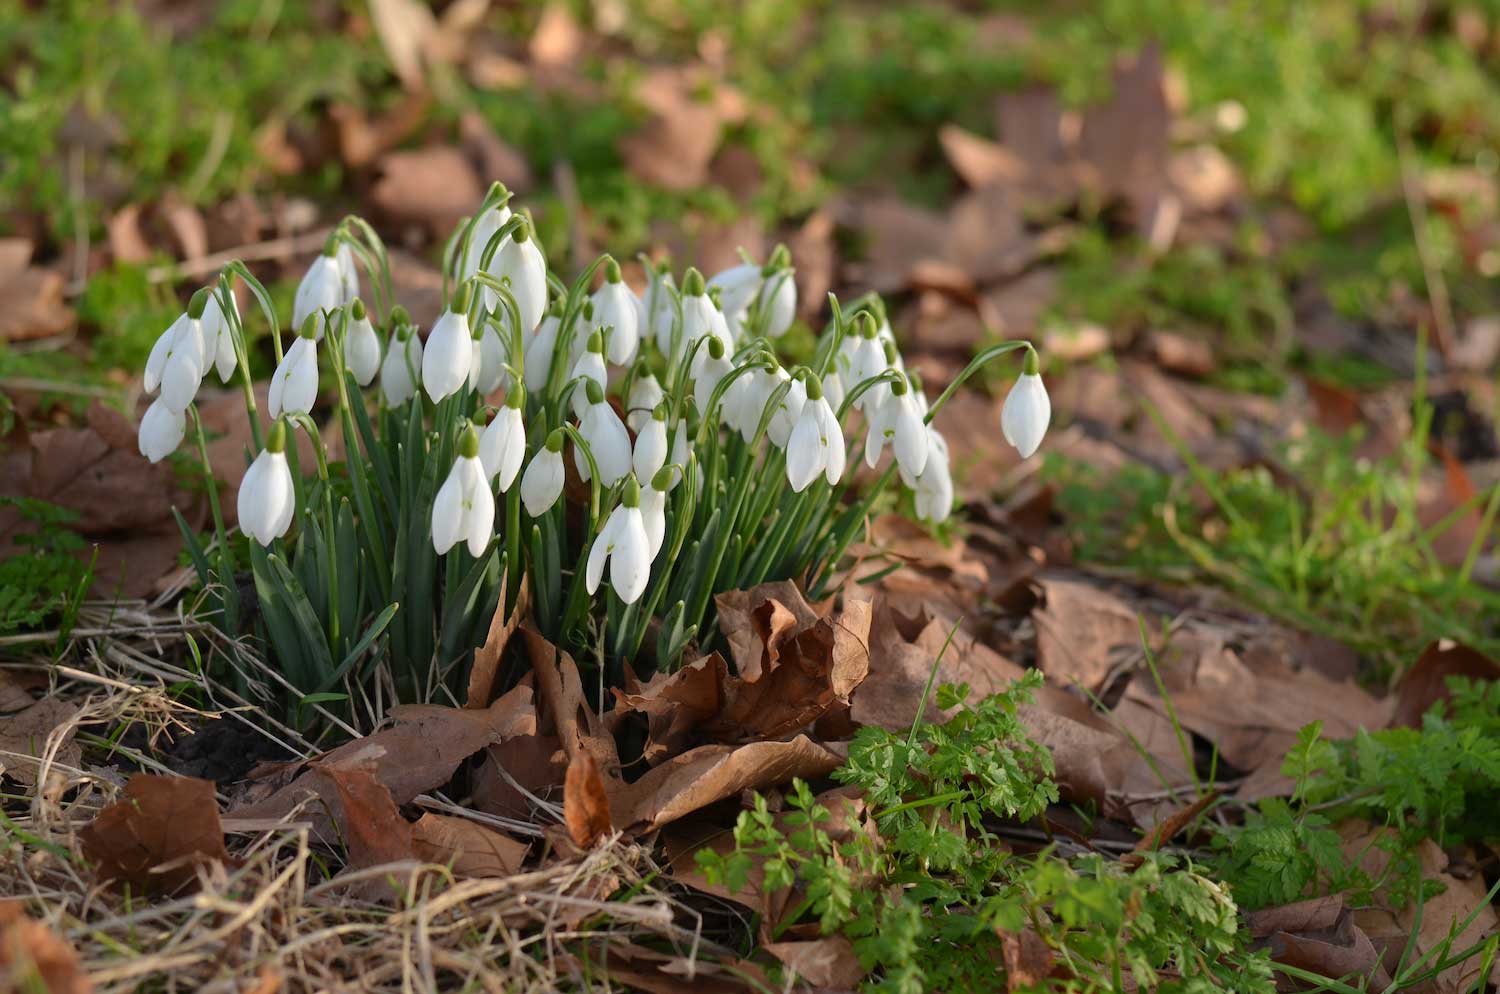 Common snowdrops peeking up from the ground.